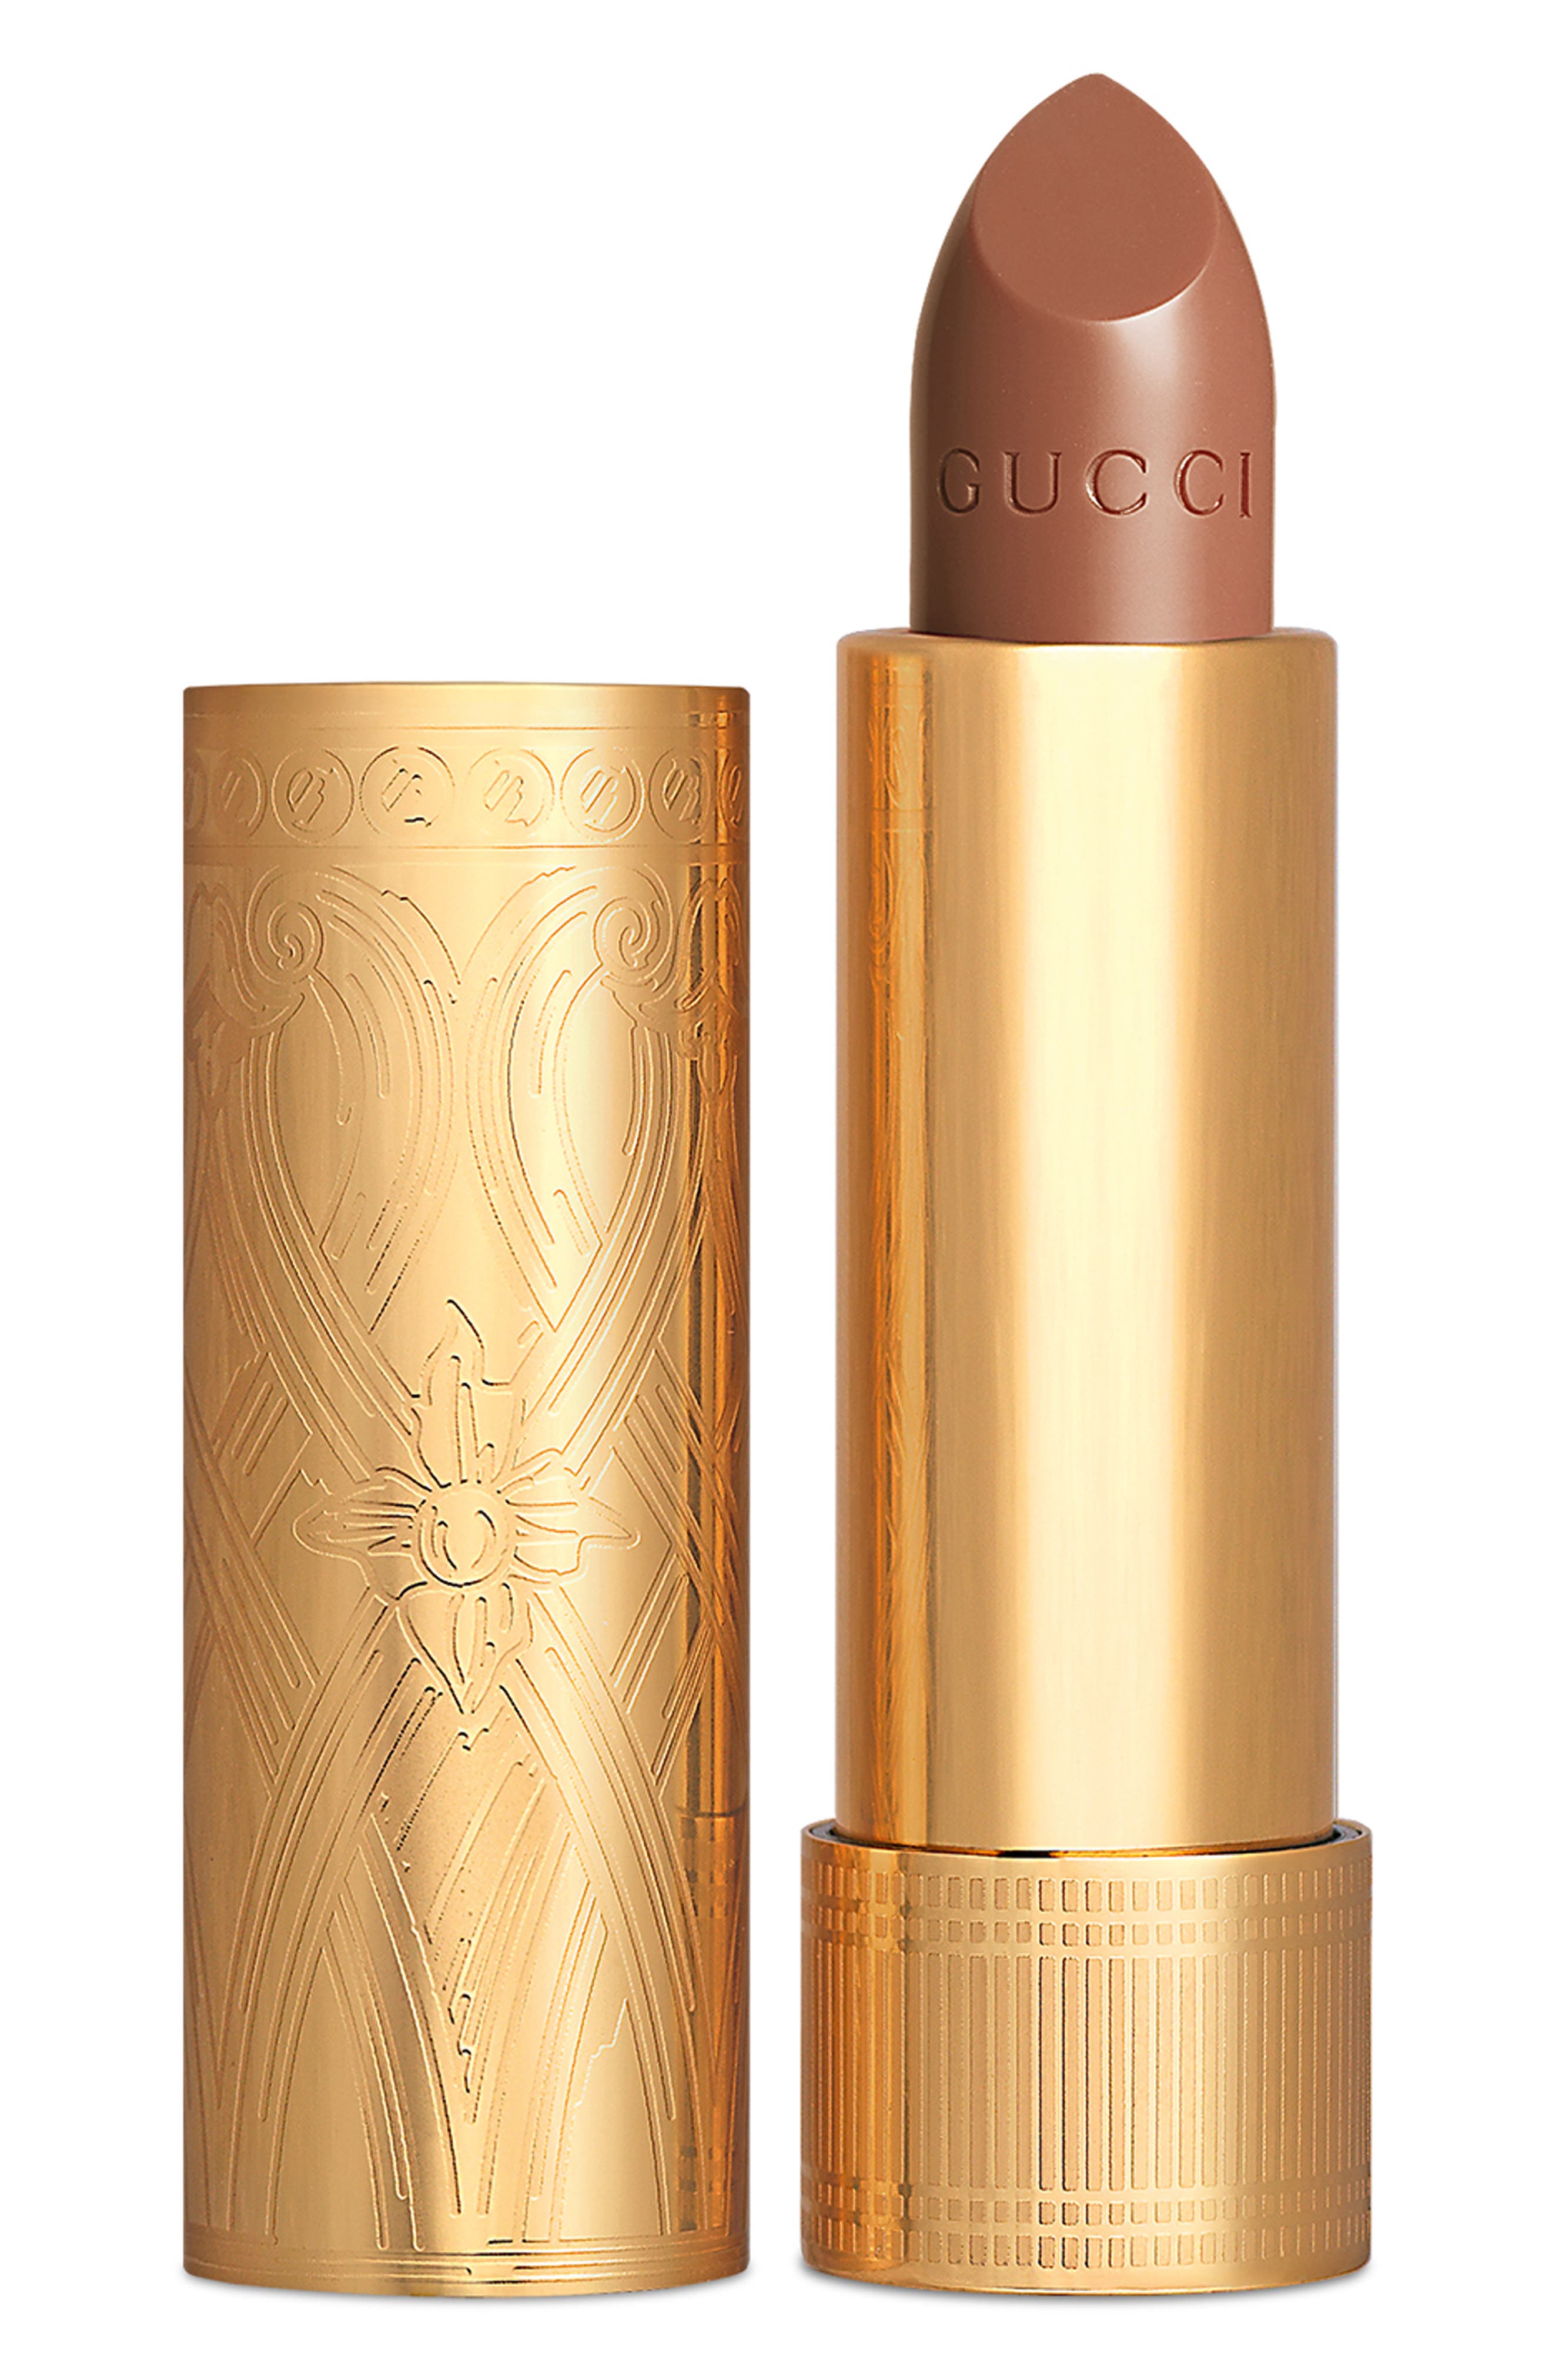 Gucci Rouge a Levres Satin Lipstick in Penny Beige at Nordstrom